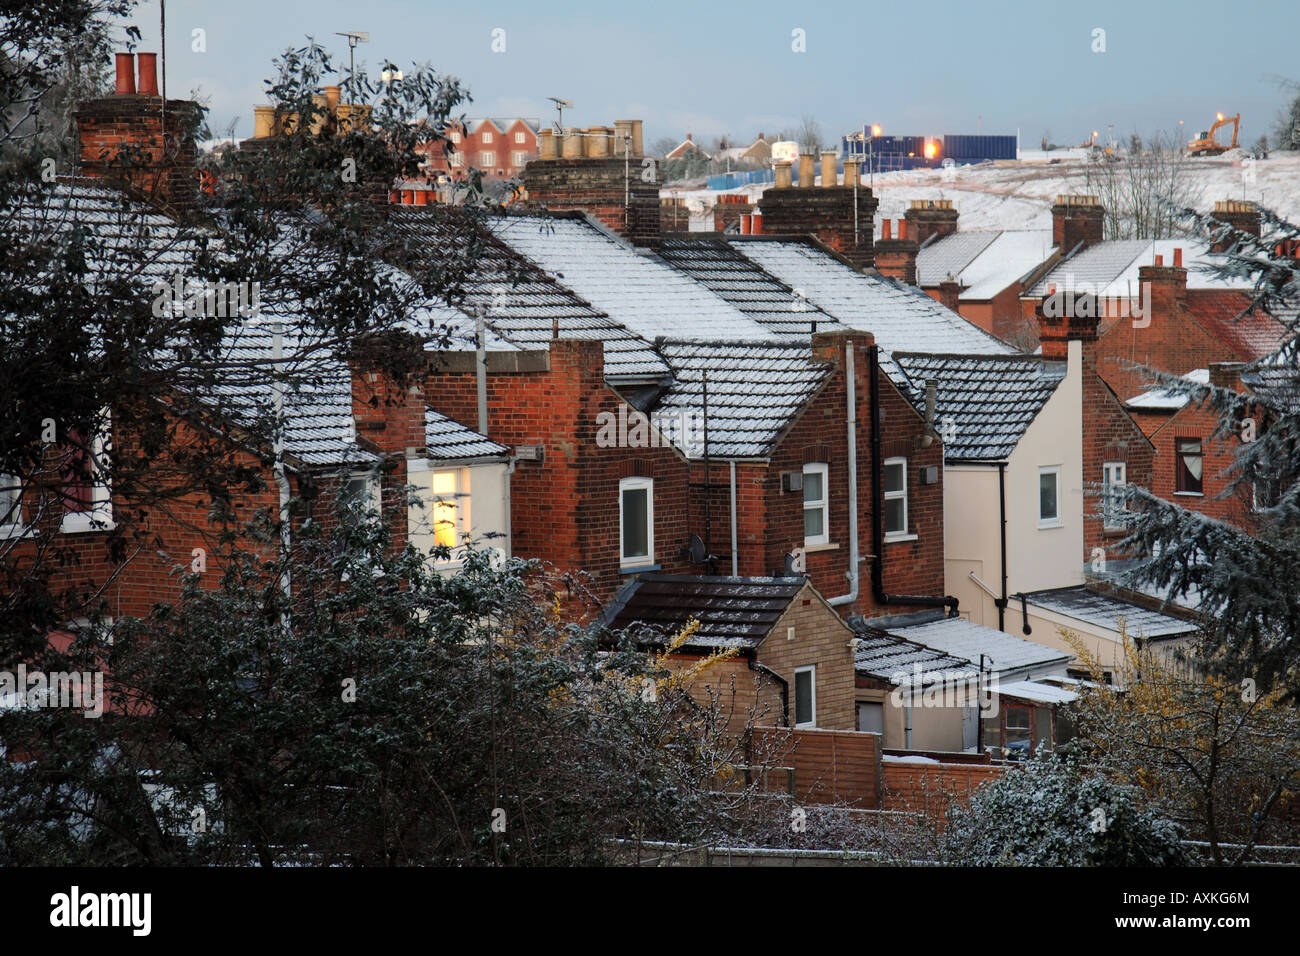 Backs of City Terraced houses at dusk in Winter Snow Stock Photo